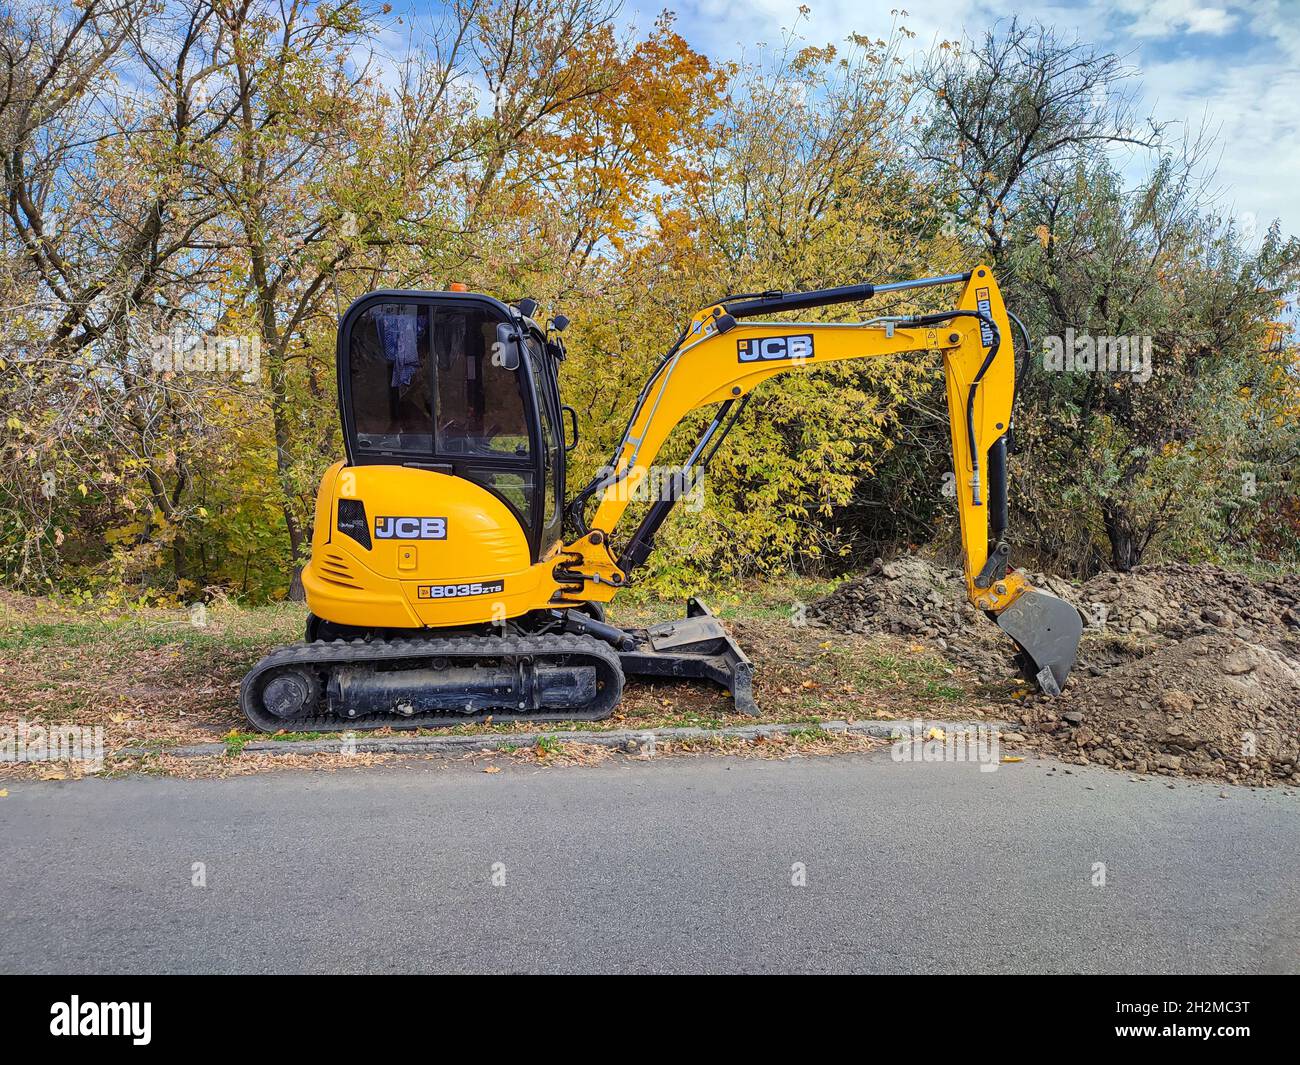 Modern yellow JCB digger or excavator performs excavation work outdoors Stock Photo